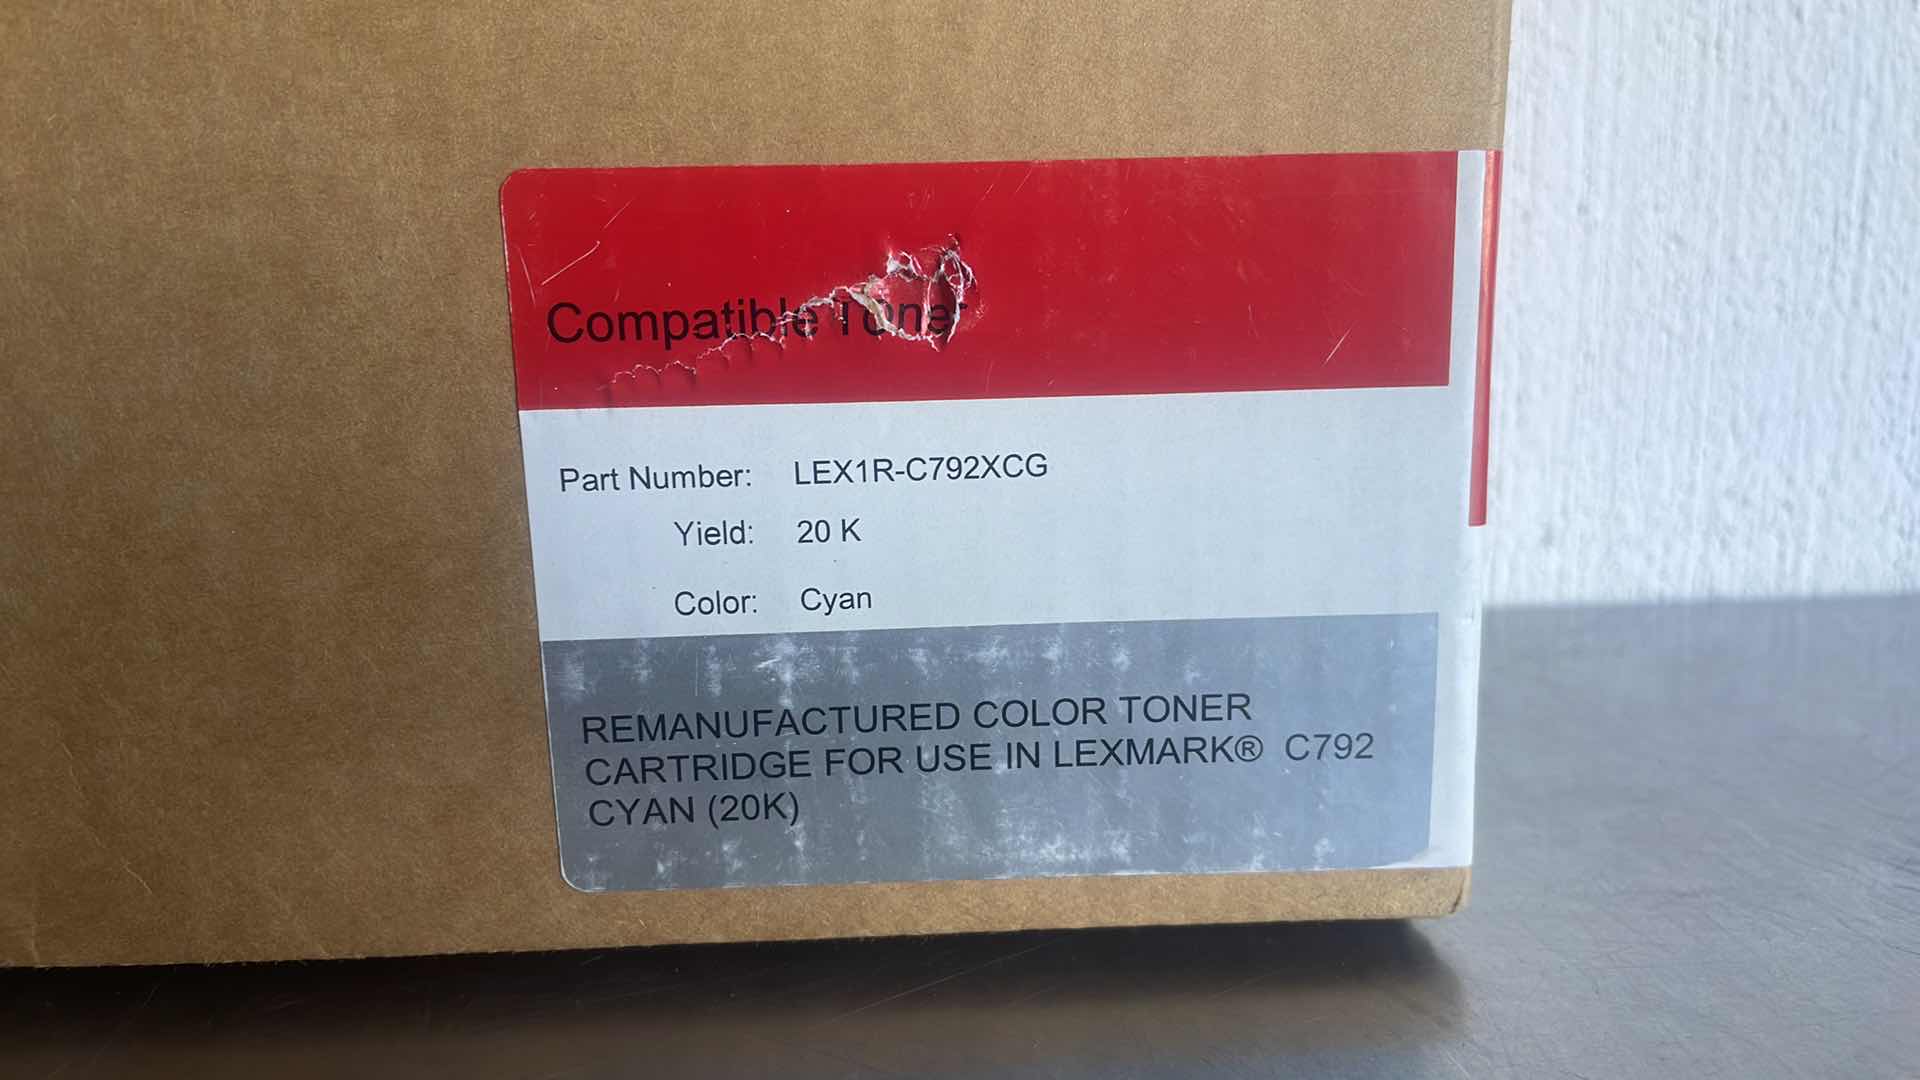 Photo 2 of REMANUFACTURED
COLOR TONER
CARTRIDGE FOR USE IN LEXMARK® C792 CYAN (20K)